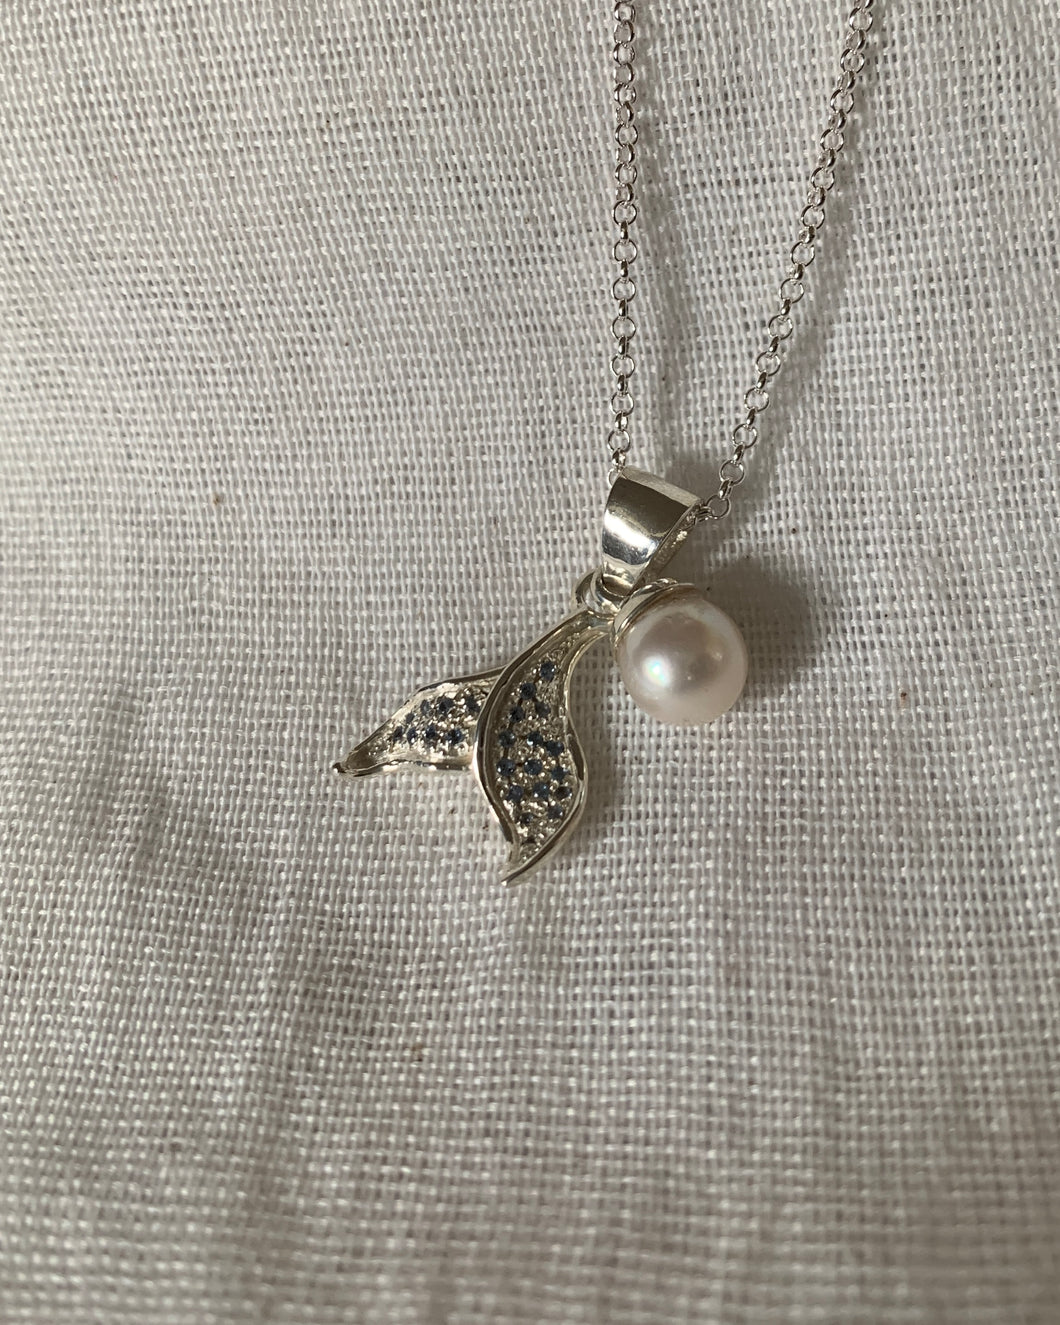 Mermaid Tail & pearl necklace in 14k white gold chain